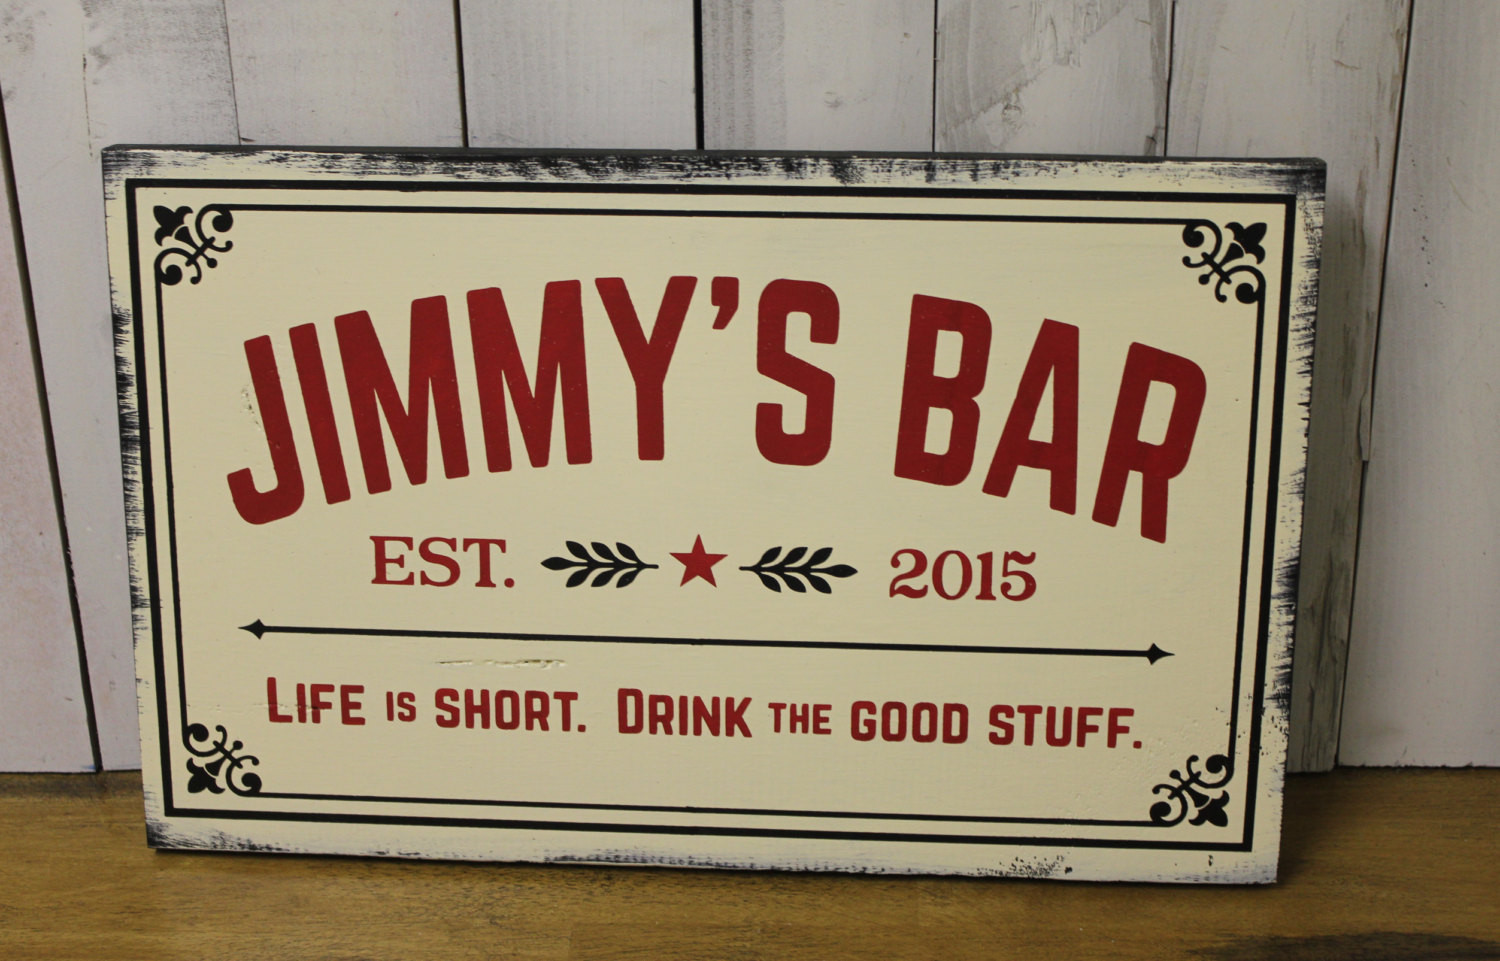 Man Cave Christmas Gifts
 Personalized BAR Sign Man Cave Christmas Gift YOU choose